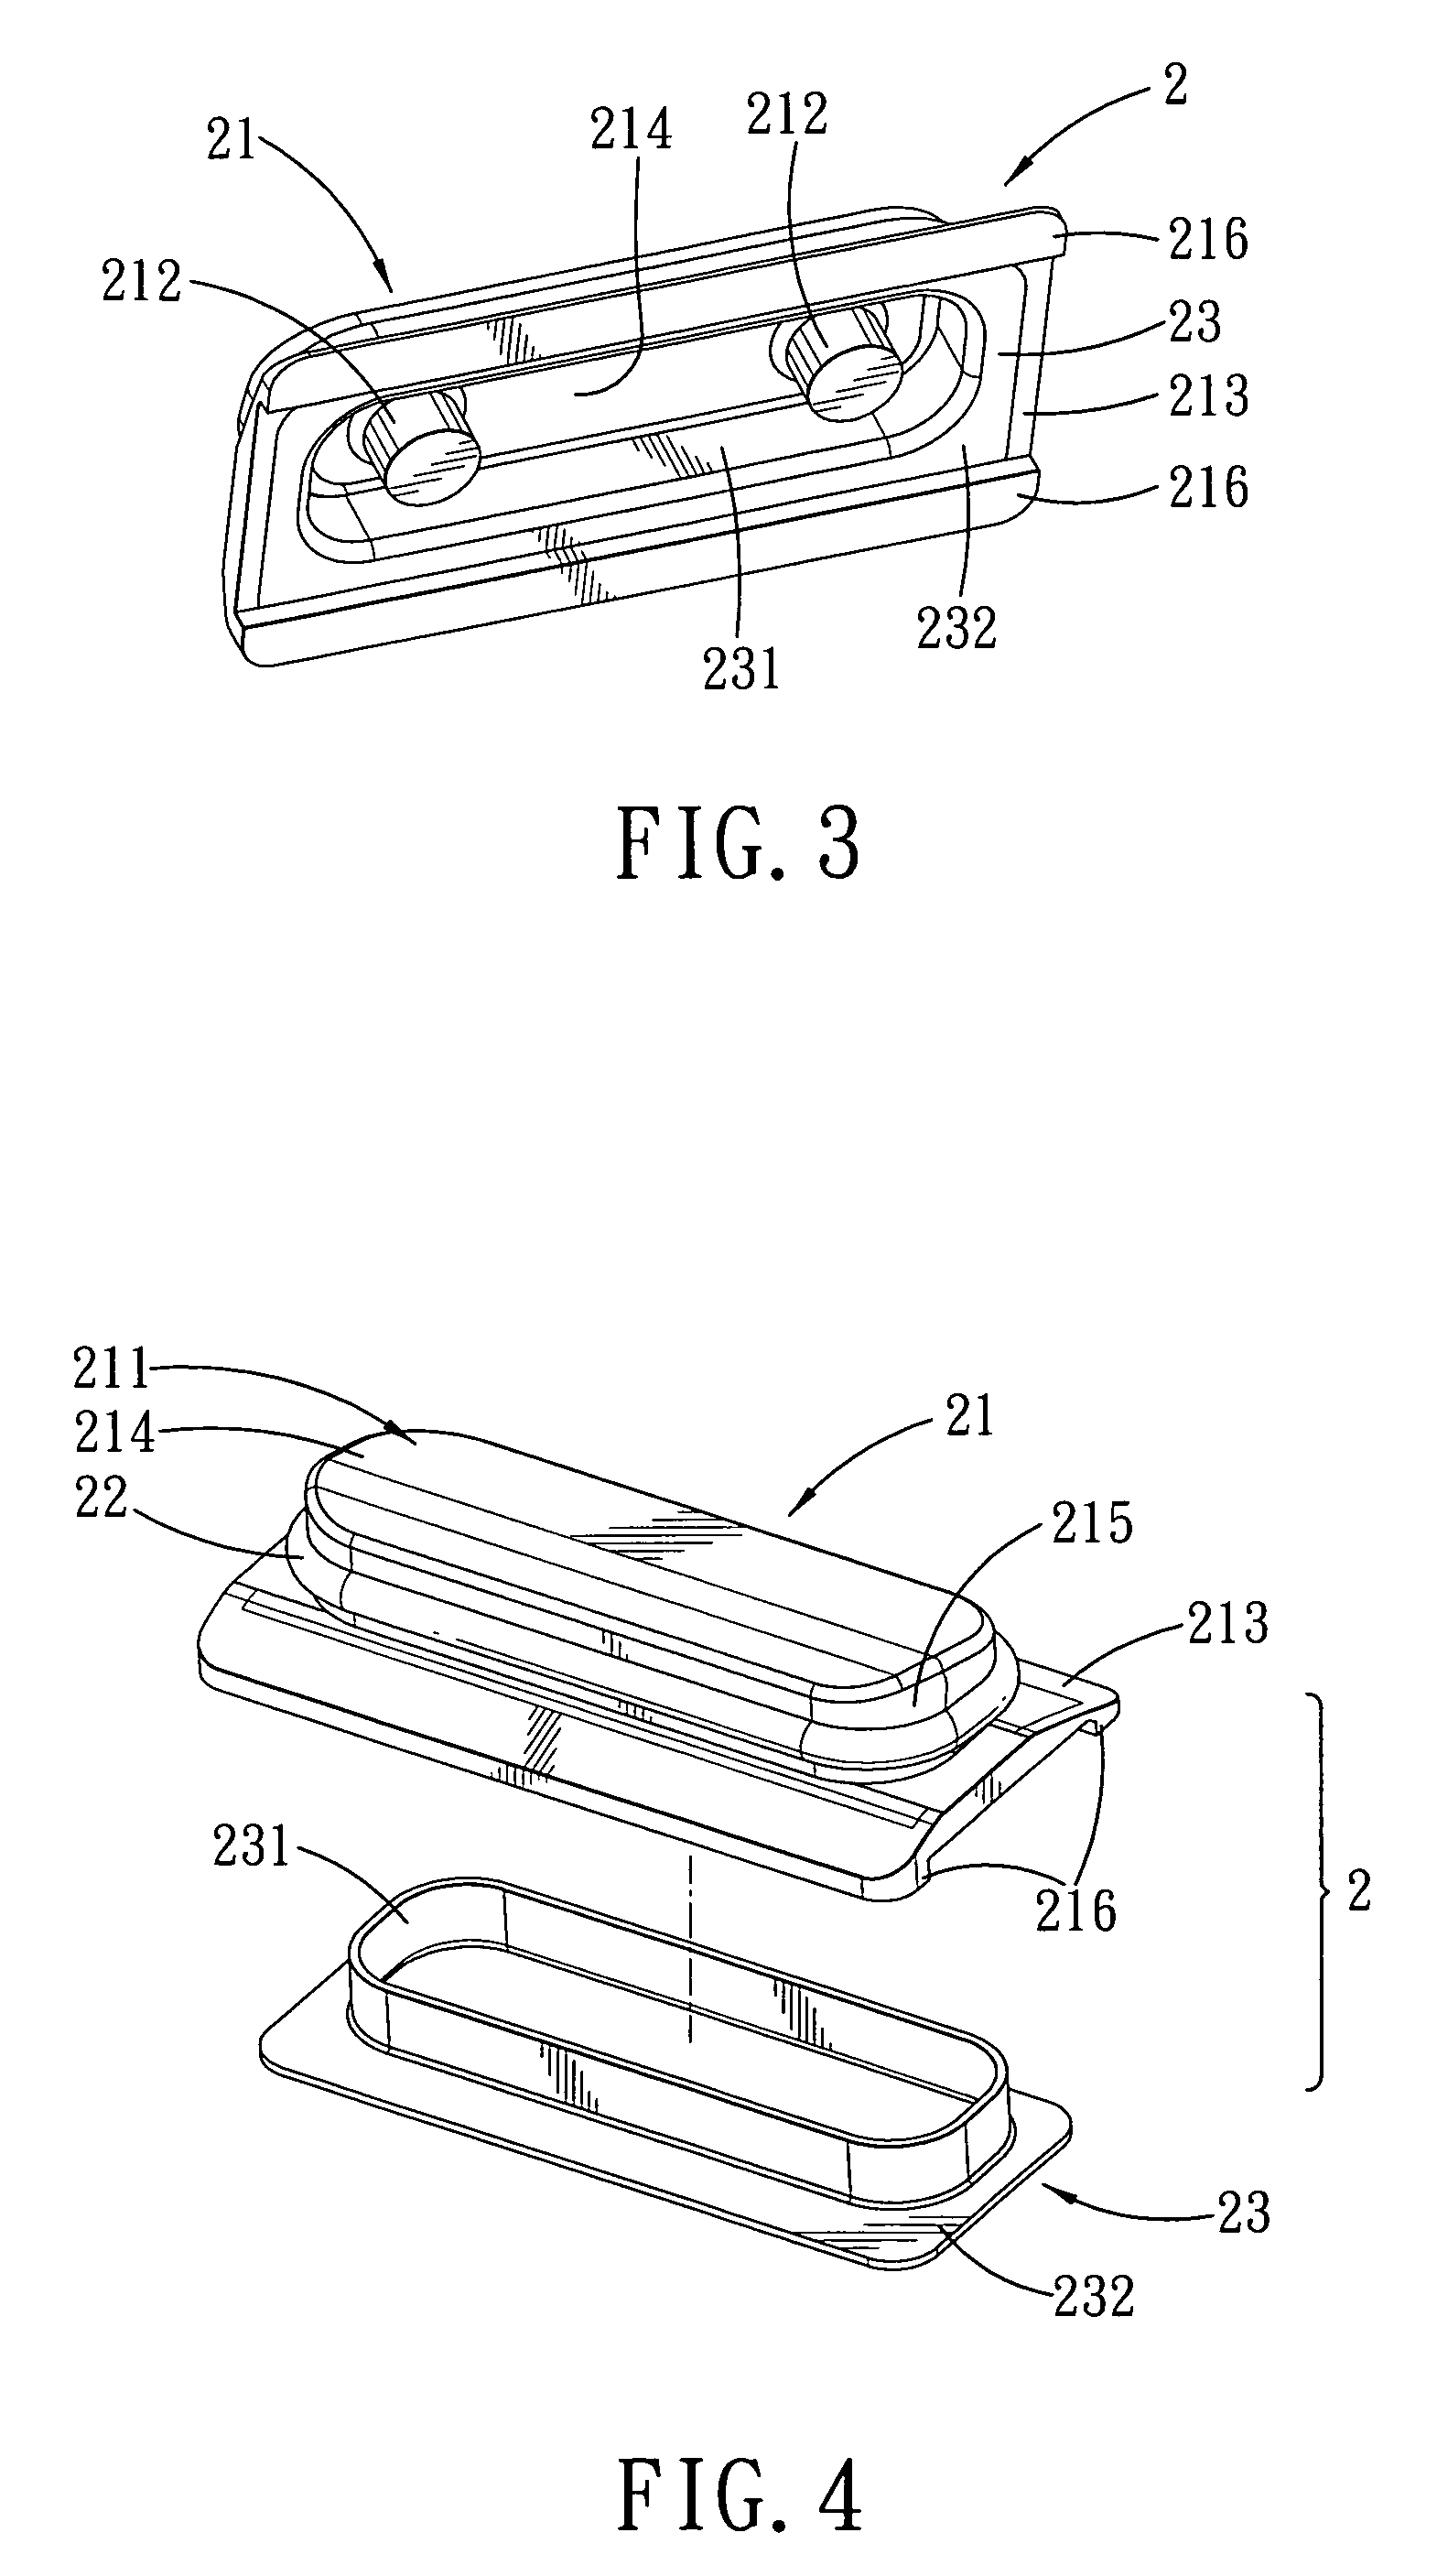 Waterproof press key and assembly of an electronic device housing and the waterproof press key